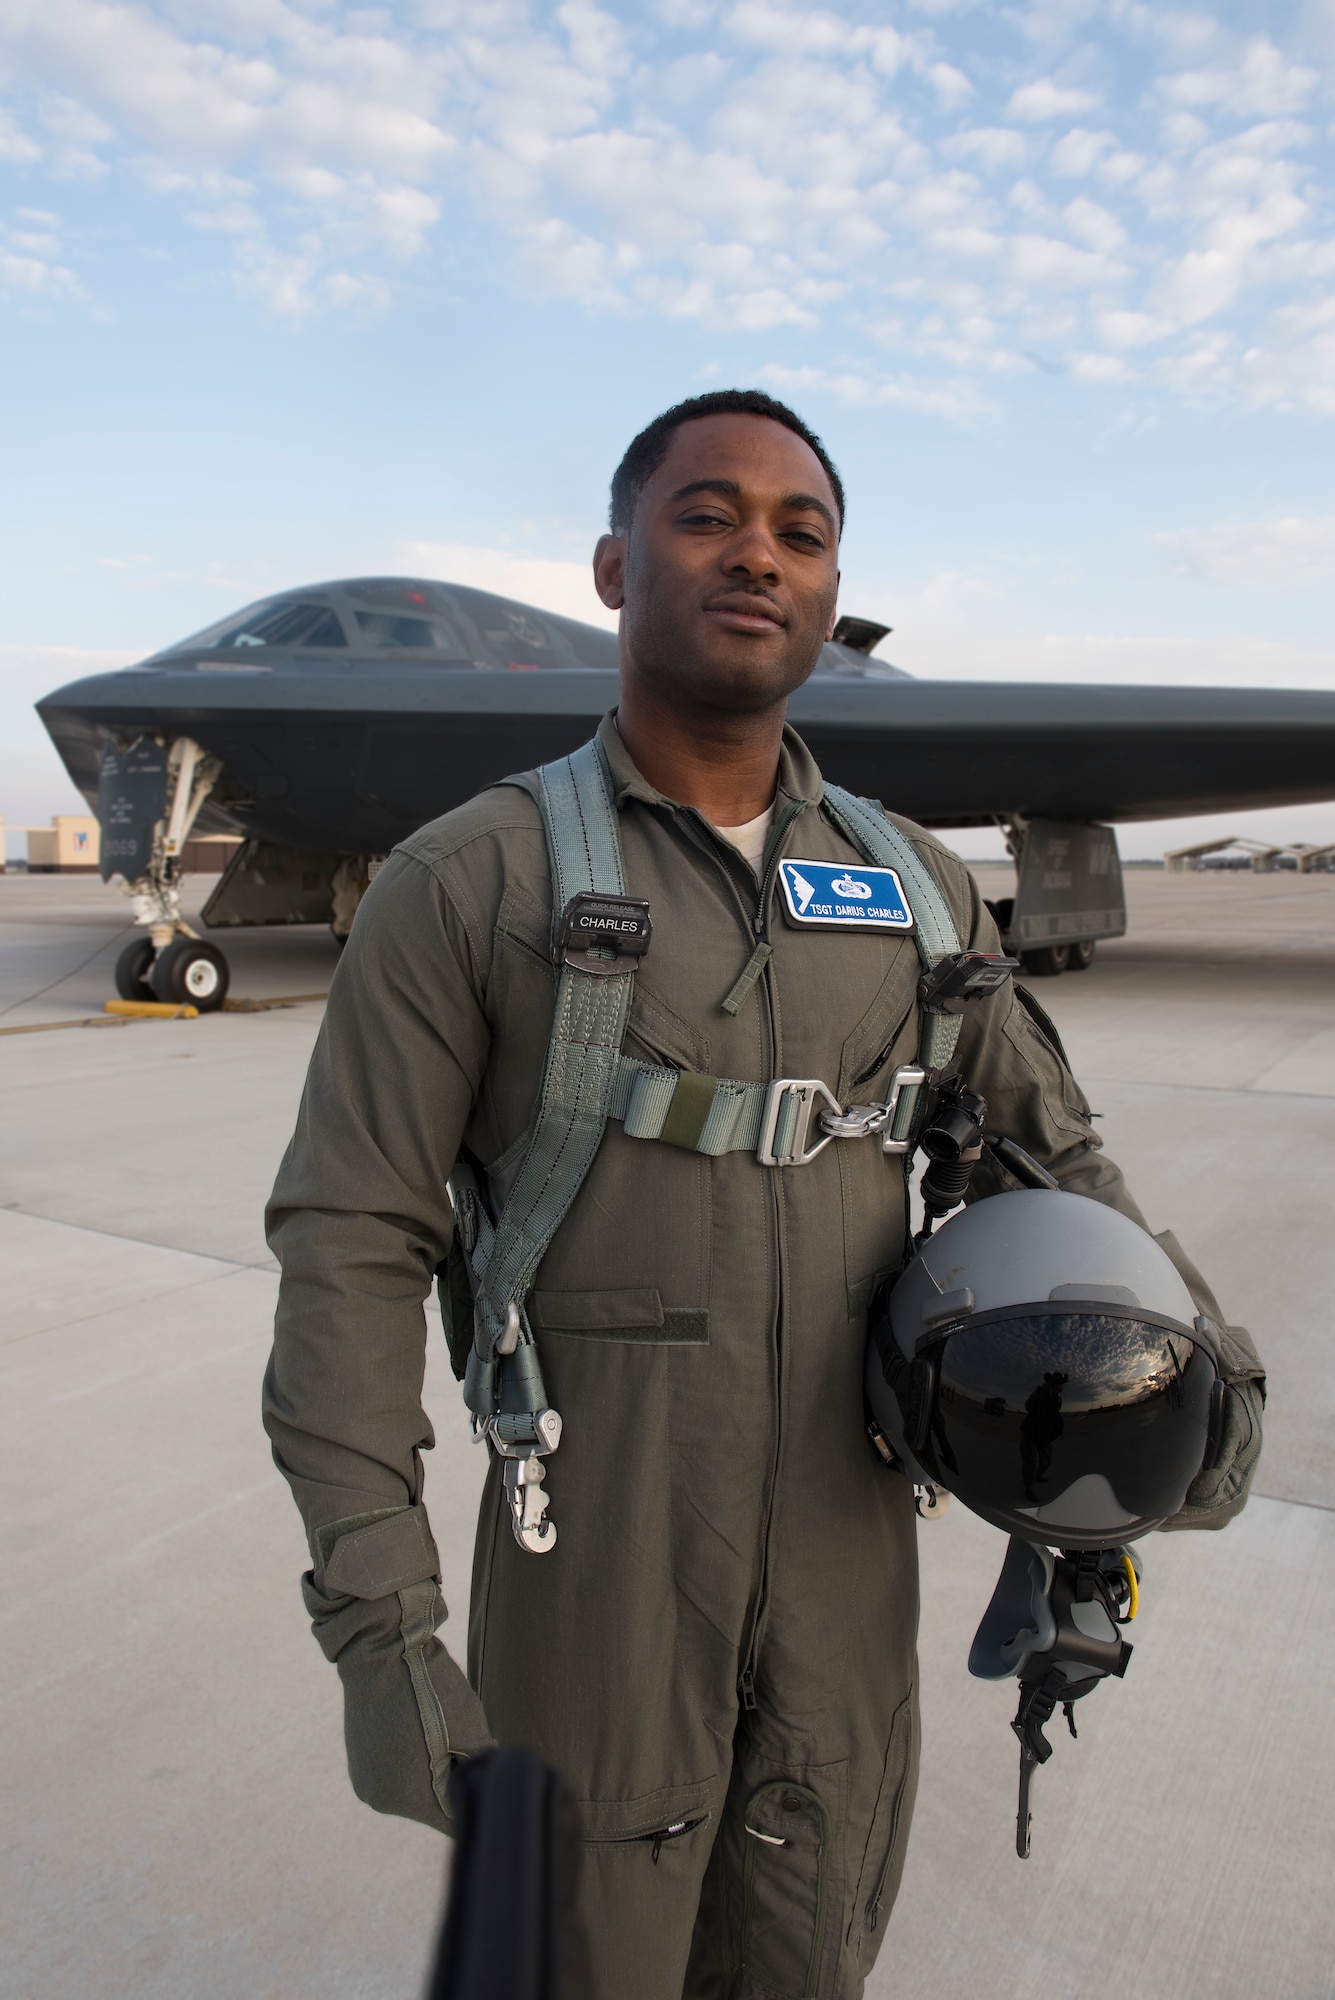 Tech. Sgt. Darius Charles, a Wing 2019 annual award winner, won an incentive flight in one of the base's B-2 Stealth Bombers.